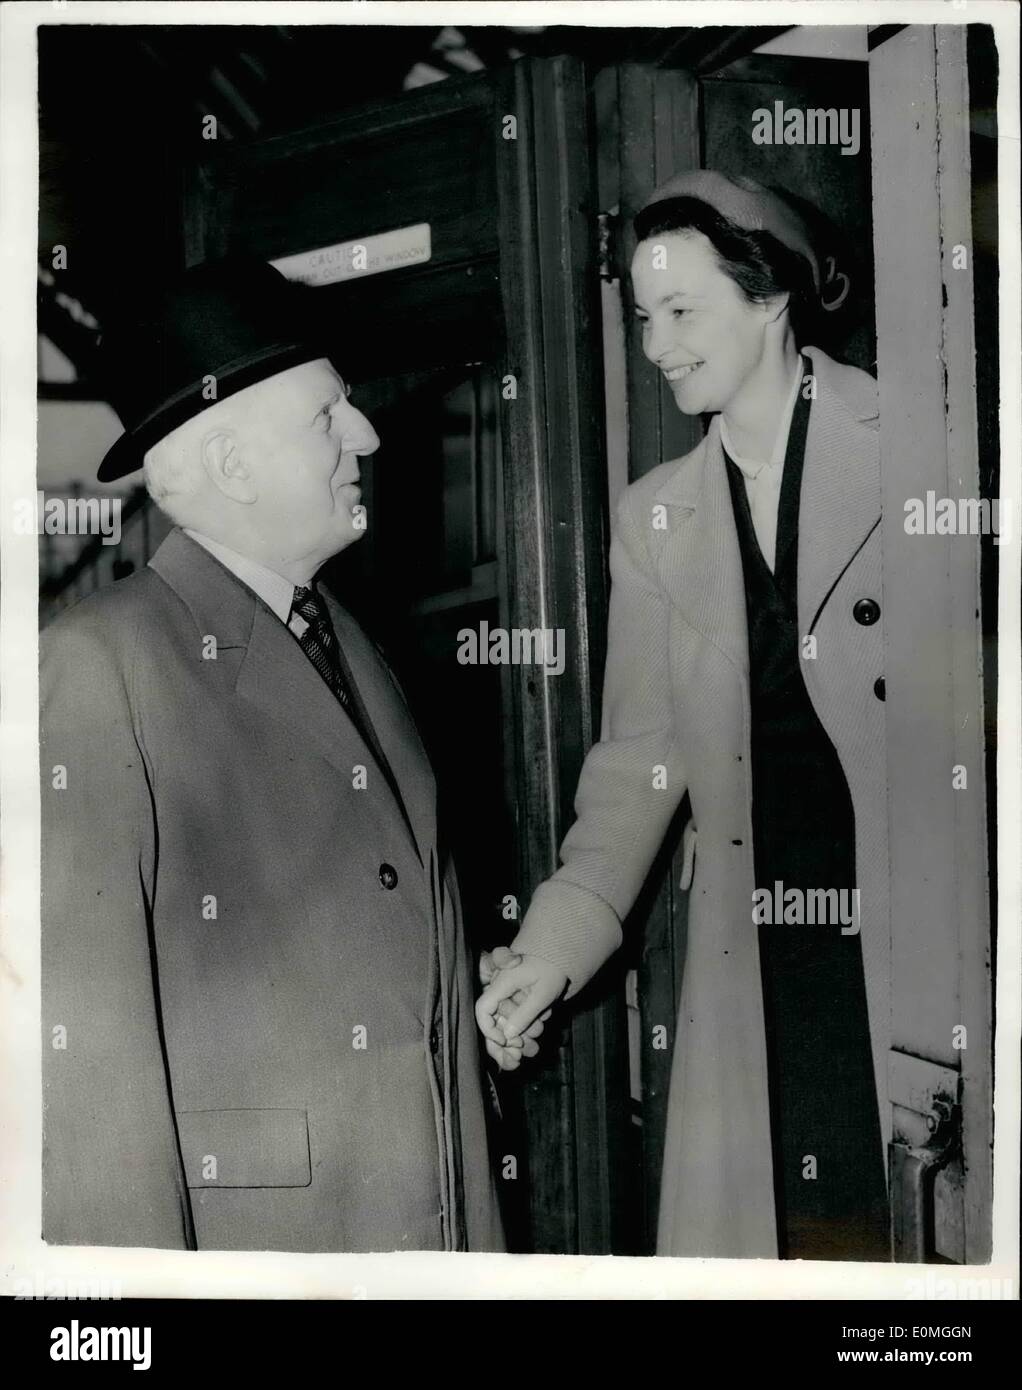 May 05, 1955 - Lord Woolton ses his niece off to Australia: Lord Woolton - Chairman of the Conservative Party - found time this Stock Photo